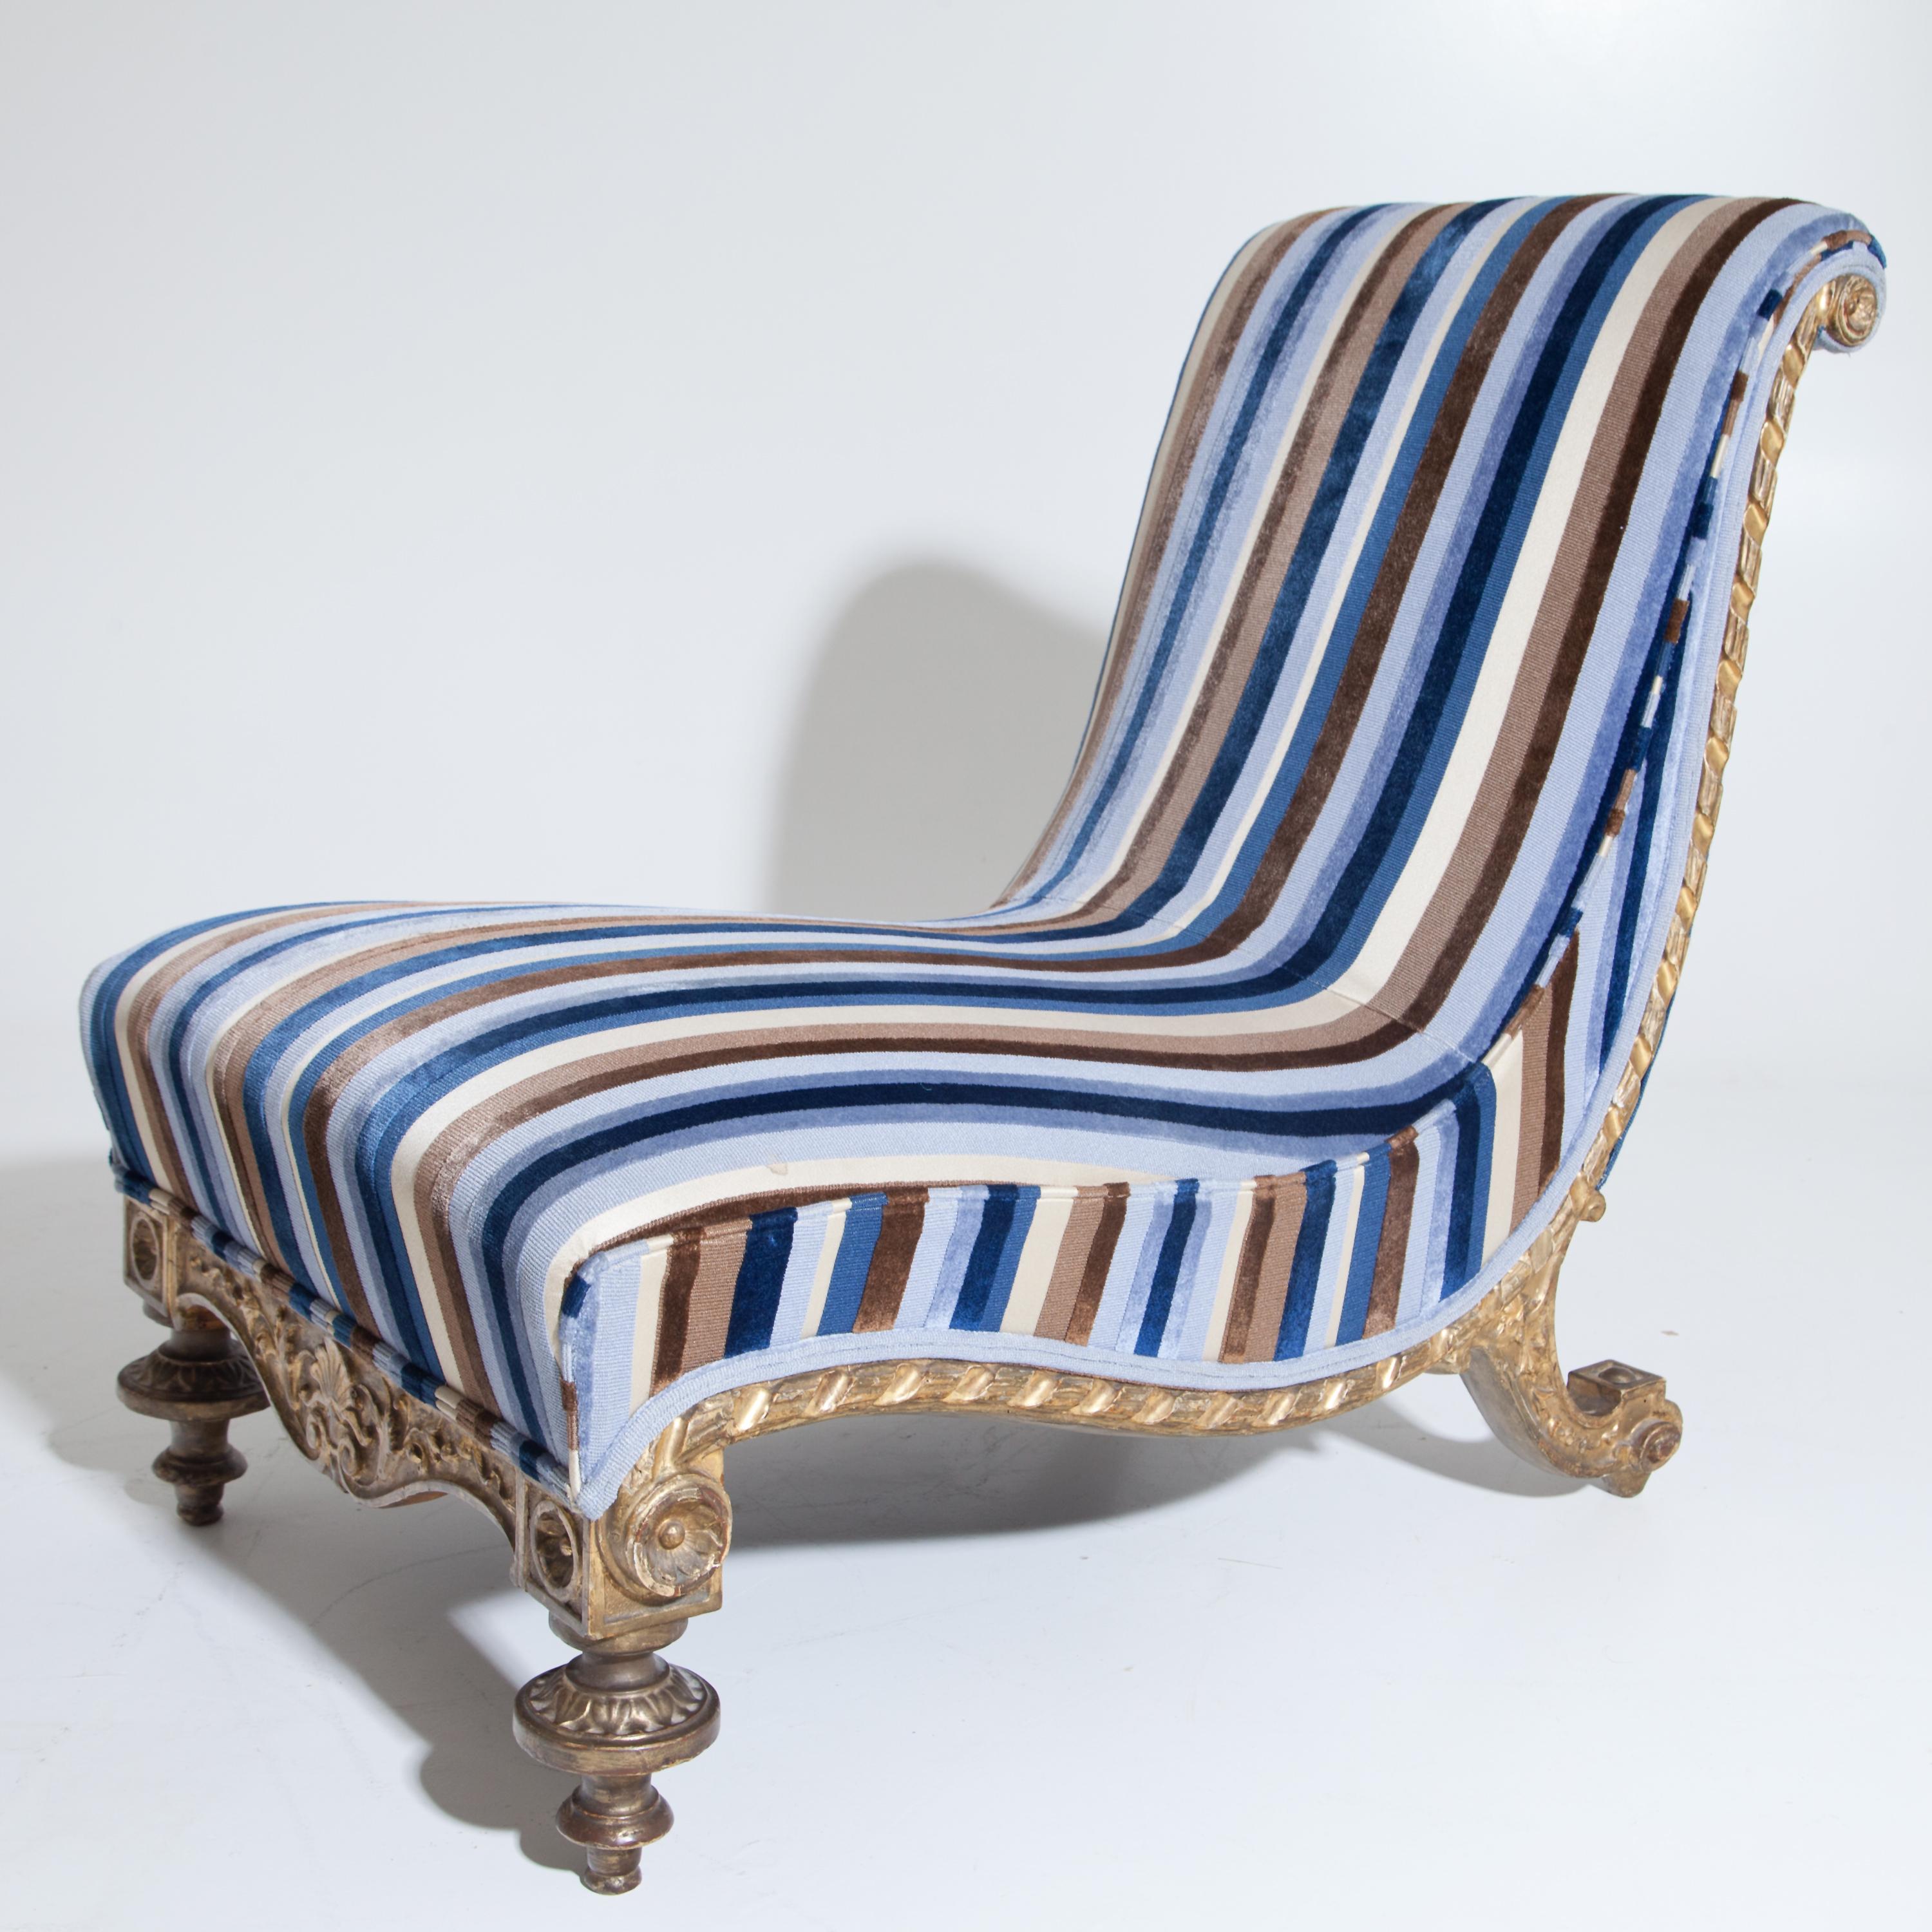 Low lounge chair on baluster legs in front and curved feet in the back. The S-shaped curved seat is covered with striped fabric. The frame is carved and golden patinated.
  